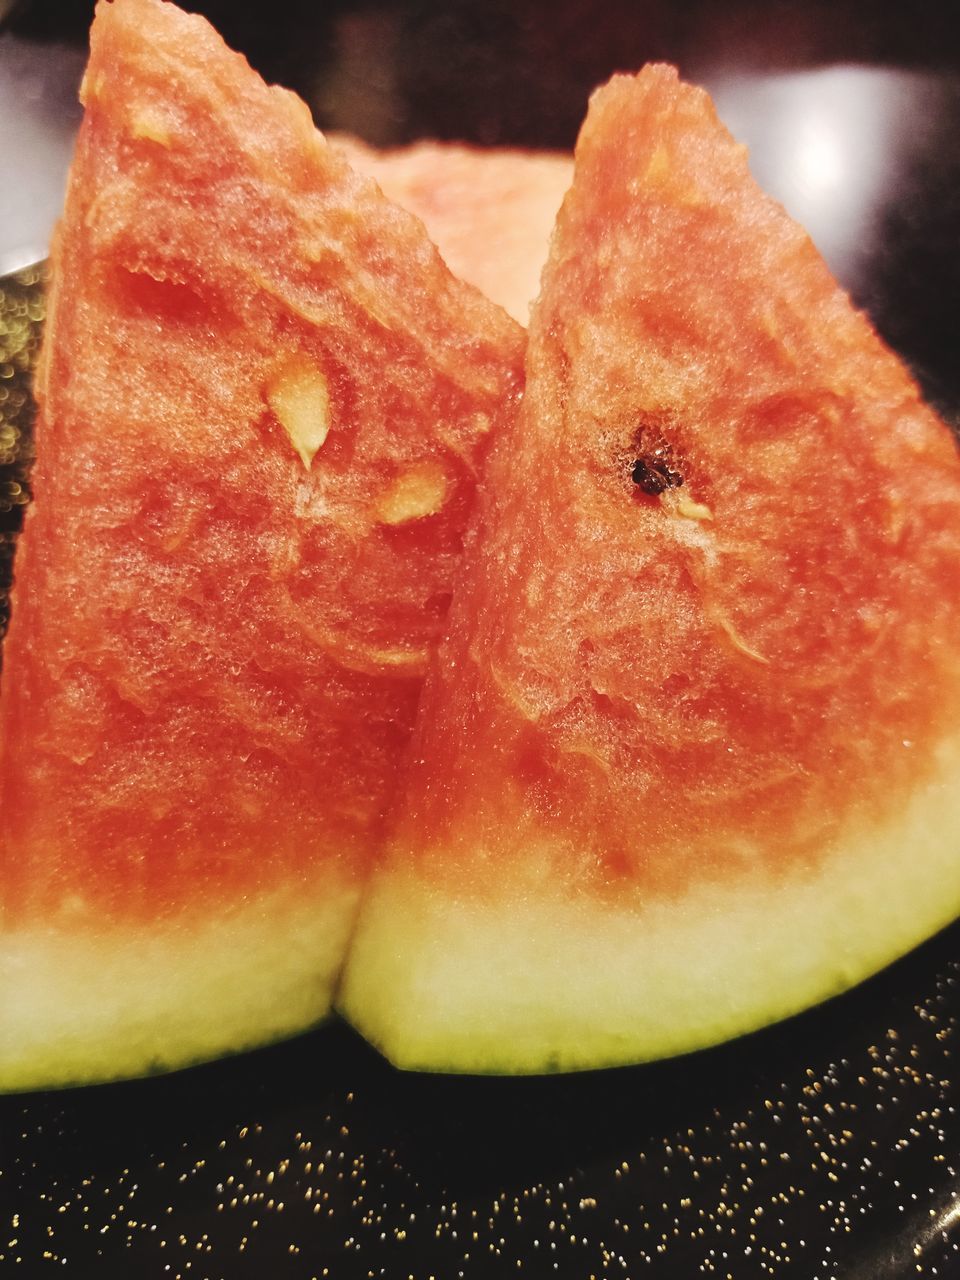 CLOSE-UP OF WATERMELON SLICES